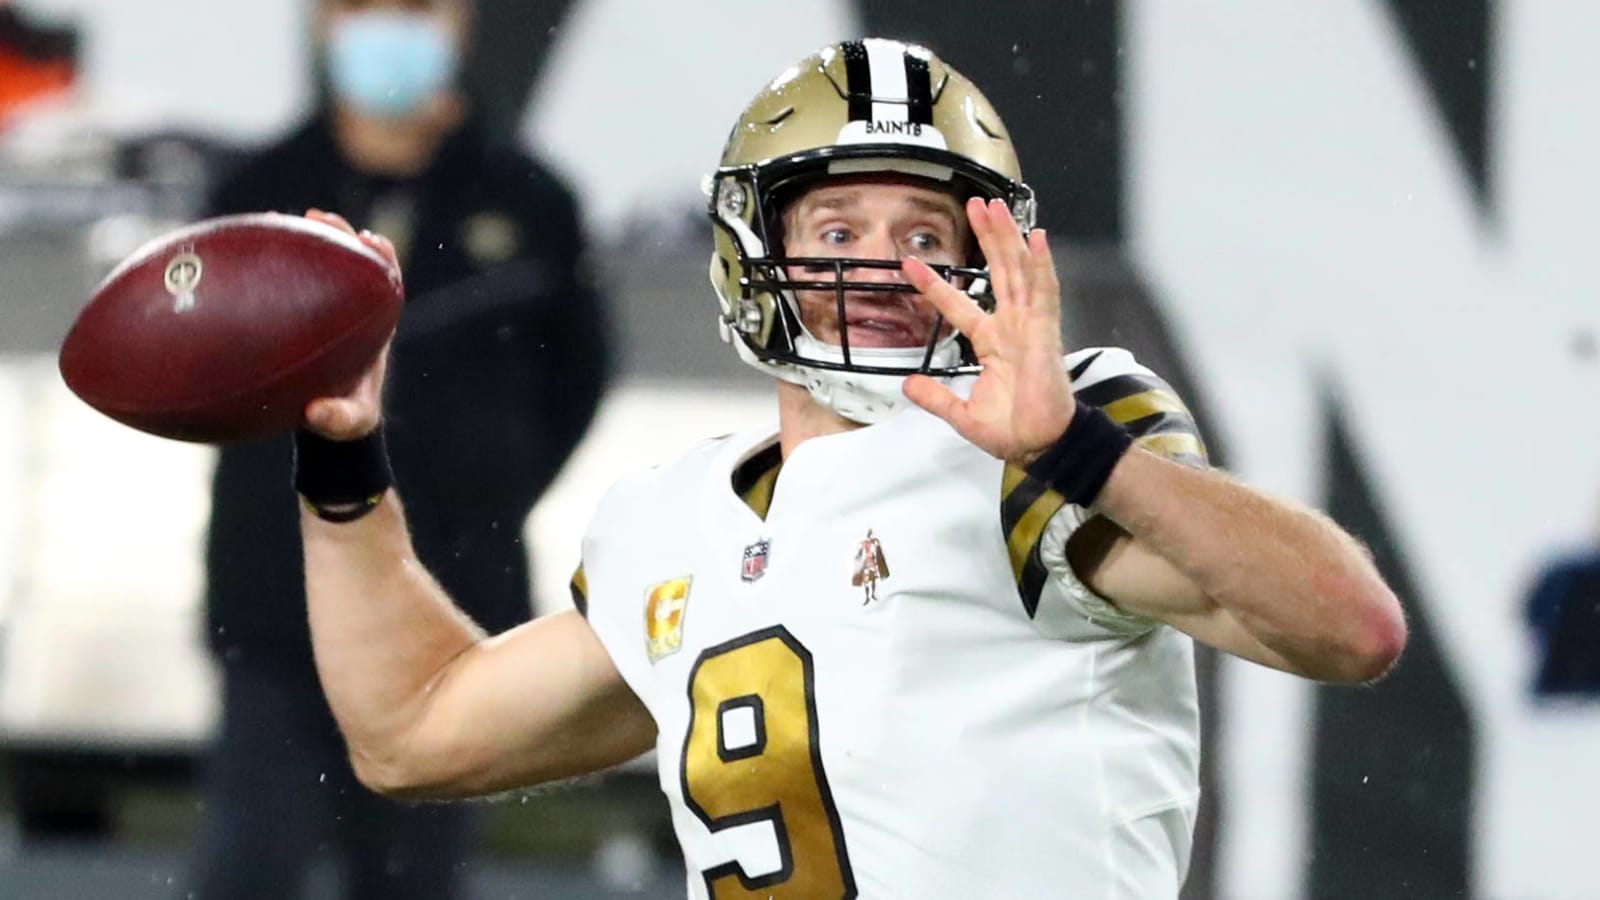 Drew Brees not 100 percent, unsure of how healed ribs are?